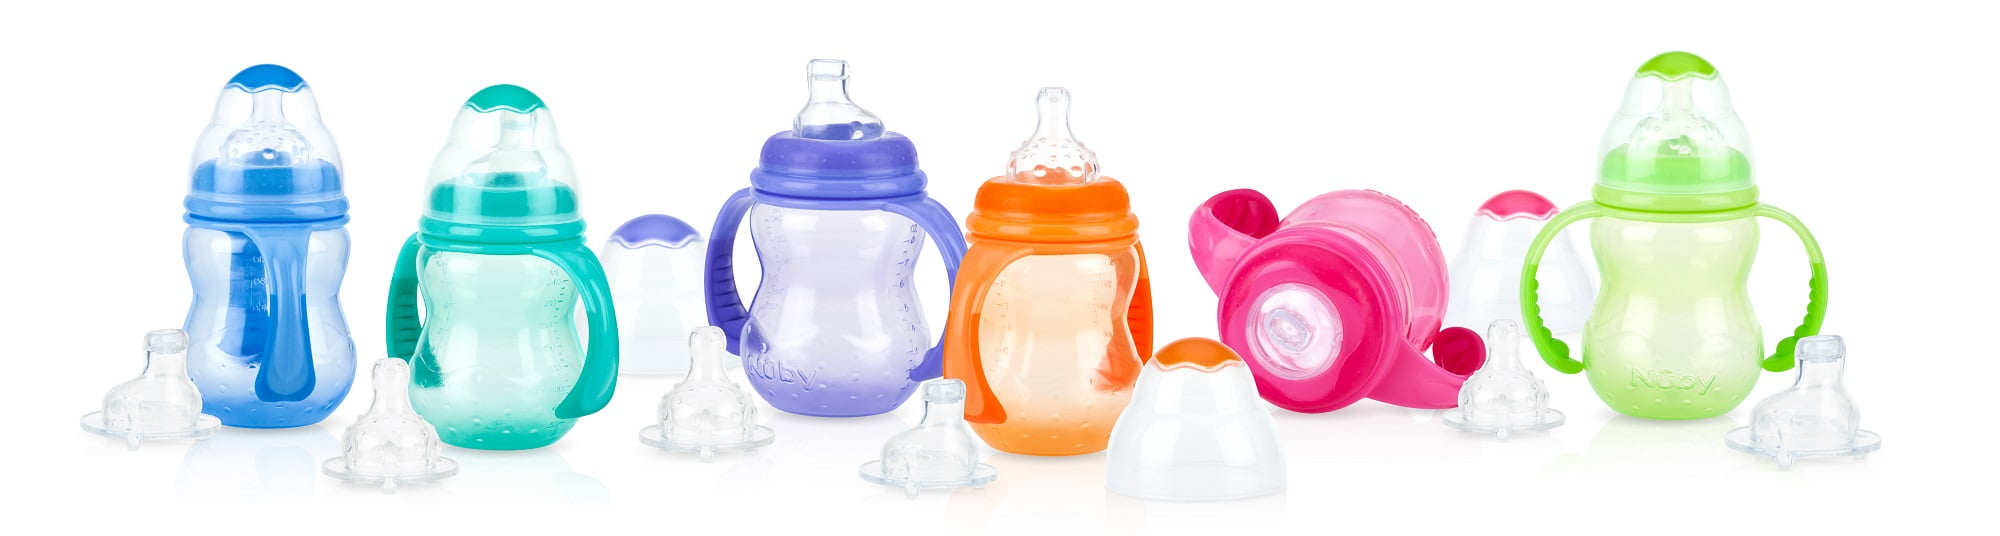 61mm Baby Cup Feeding Bottle Handles Holder Easy Grip For Tommee Tippee ClosersN 